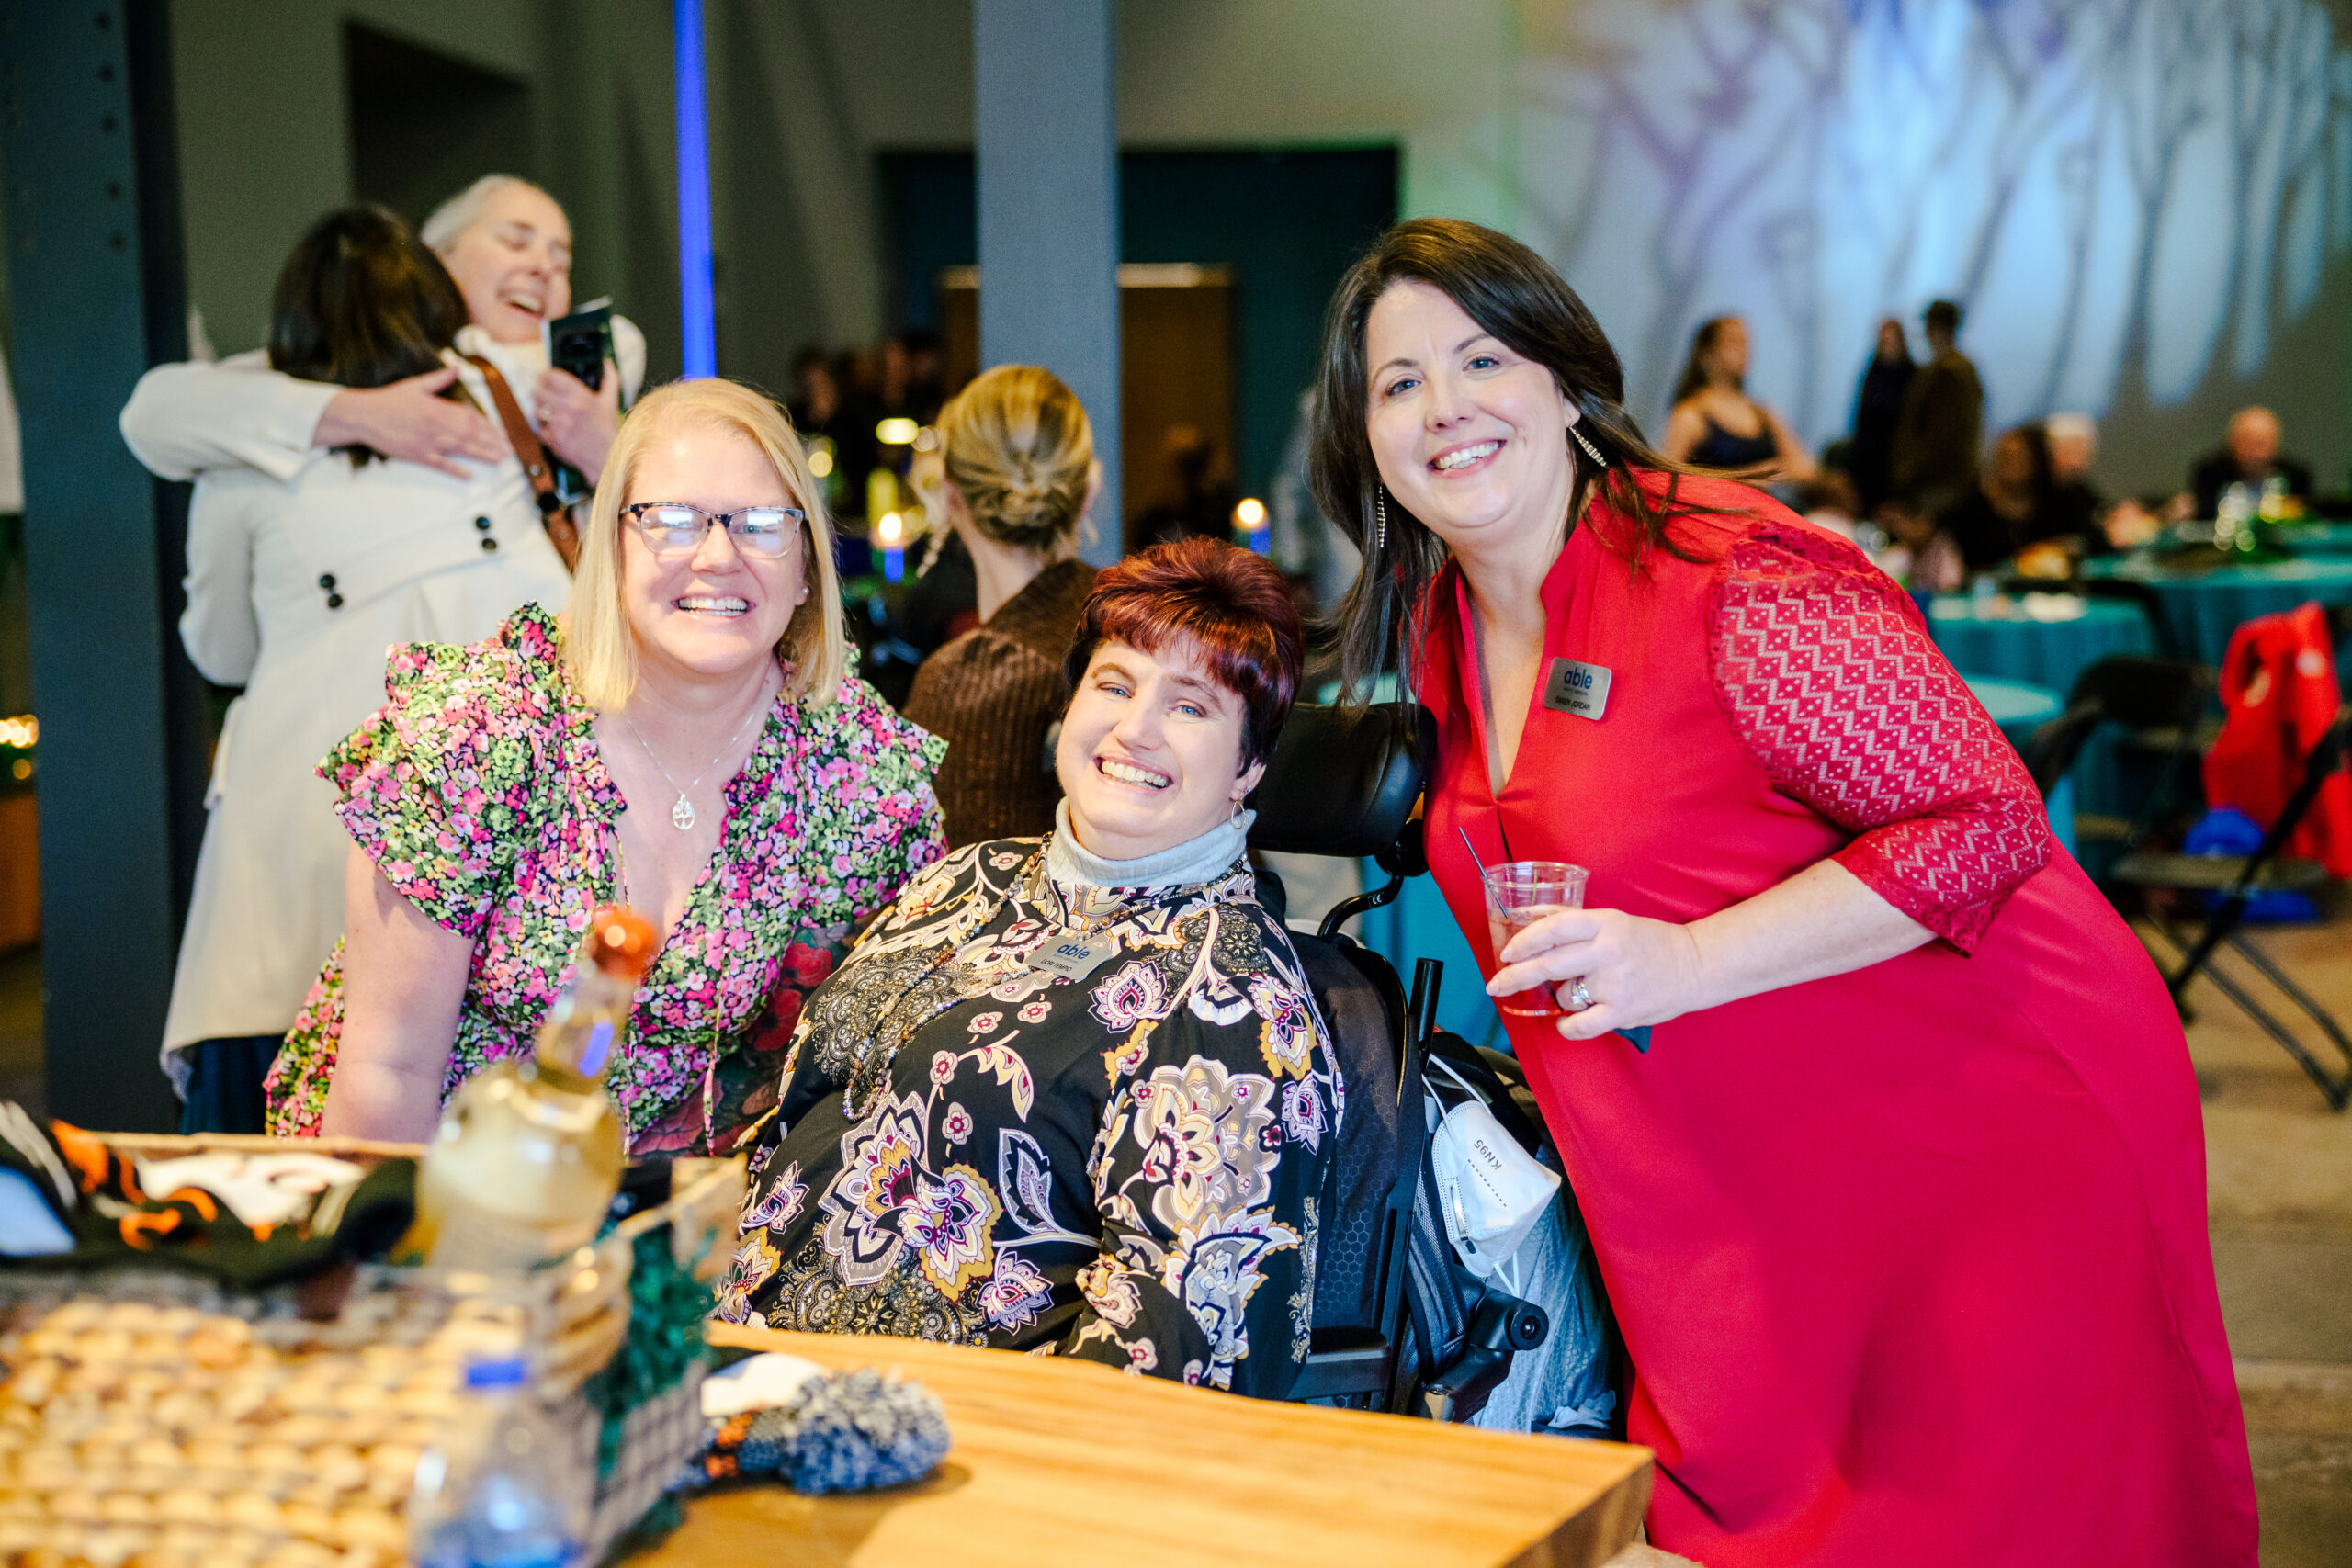 Keri, a white person in a floral dress and glasses, Dori, a white woman using a power wheelchair, and Sandy, a white woman in a red dress, pose and smile together for a photo.